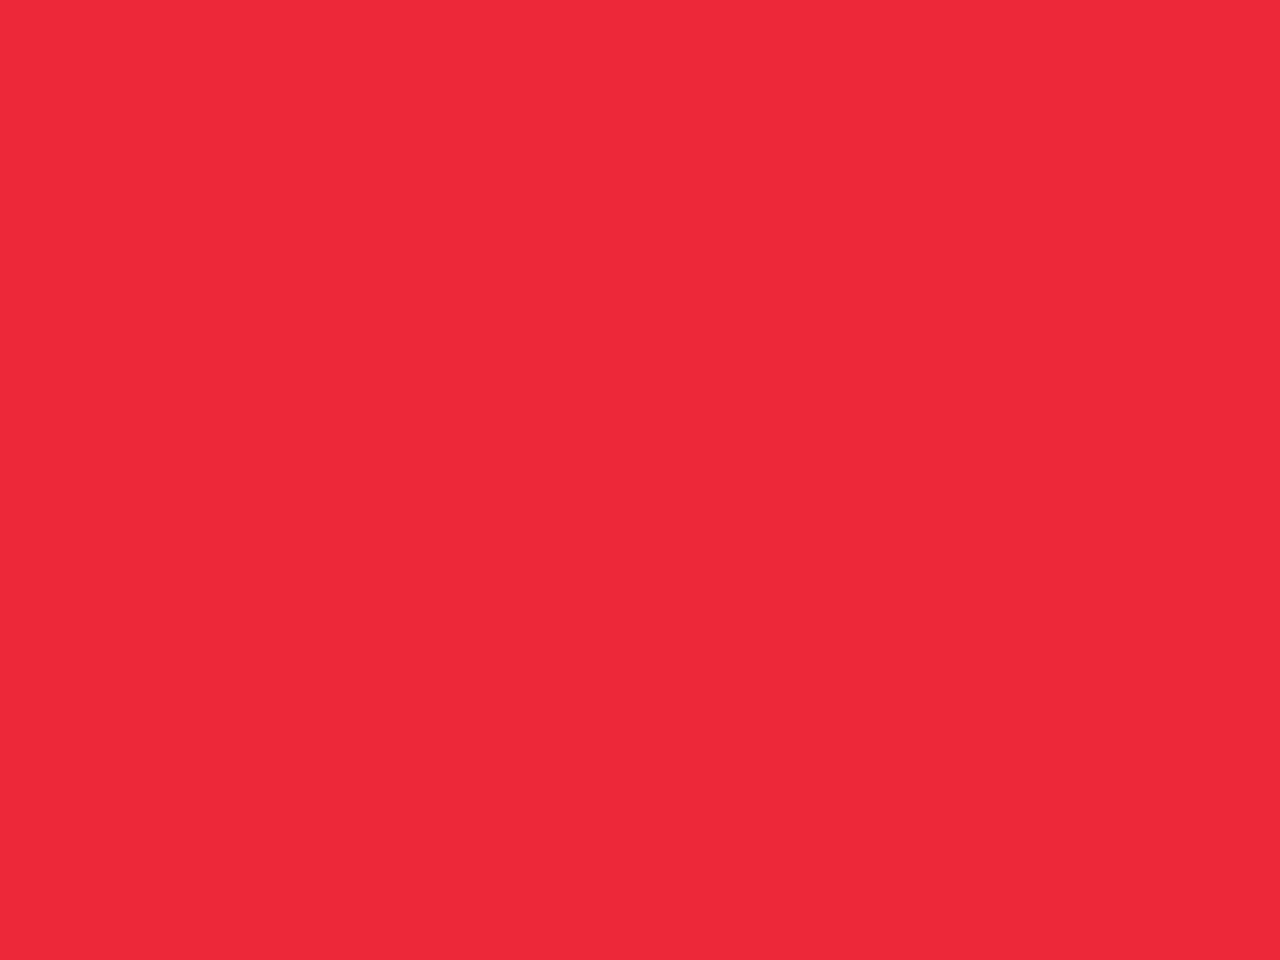 1280x960 Red Pantone Solid Color Background